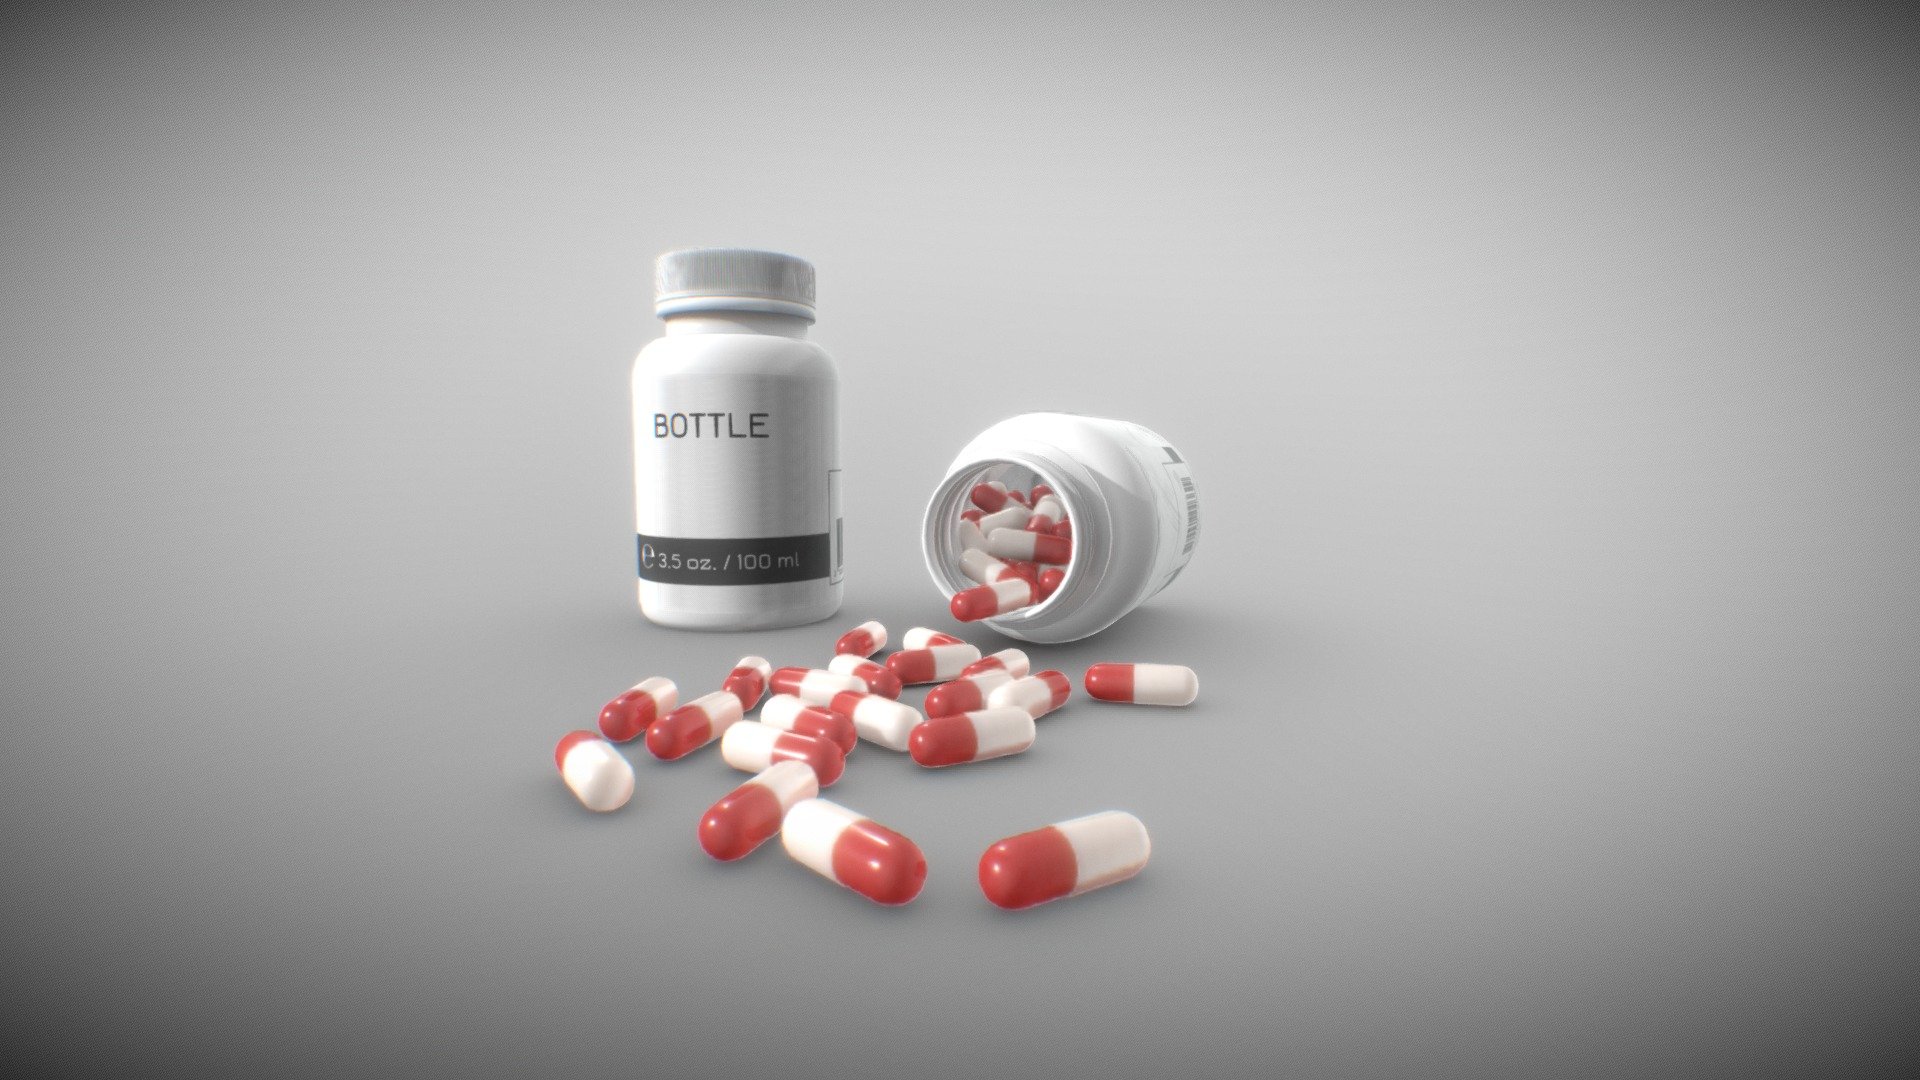 Supplement bottle with a pile of capsules




Plastic bottle 100ml 3d model

Ready to render in Blender3D Cycles or Eevee

FBX, ABC, DAE and OBJ formats also available.

glTF GLB format available

UV unwrapped

Real World Scale

Units: metric

Bottle Dimensions: 8 cm x 4.6 cm x 4.6 cm

Materials and textures included.

PBR Textures (diffuse, glossiness/roughness*, specular, normal and metlaness mask)

The capsule also has a transmission mask (red/white boundary)

Textures resolution:

4096 x 4096 (Bottle)

4096 x 2048 (Label)


1024 x 1024 (Capsules)




Polygonal count of the base meshes:



Bottle: 1348 faces

Bottle Lid: 7006 faces

Bottle Label: 156 faces


Capsule: 672 faces




Polygonal count of solidified meshes at optimal subdivision levels:



Bottle: 21632 faces

Bottle Lid: 28608 faces

Bottle Label: 2496 faces


Capsule: 2688 faces




Low Poly version (no thickness):



Bottle: 1872 faces

Bottle Lid: 7006 faces

Bottle Label: 2496 faces

Capsule: 160 faces

Enjoy!
Thank You! - Supplement Bottle with capsules - 3D model by nacl 3d model